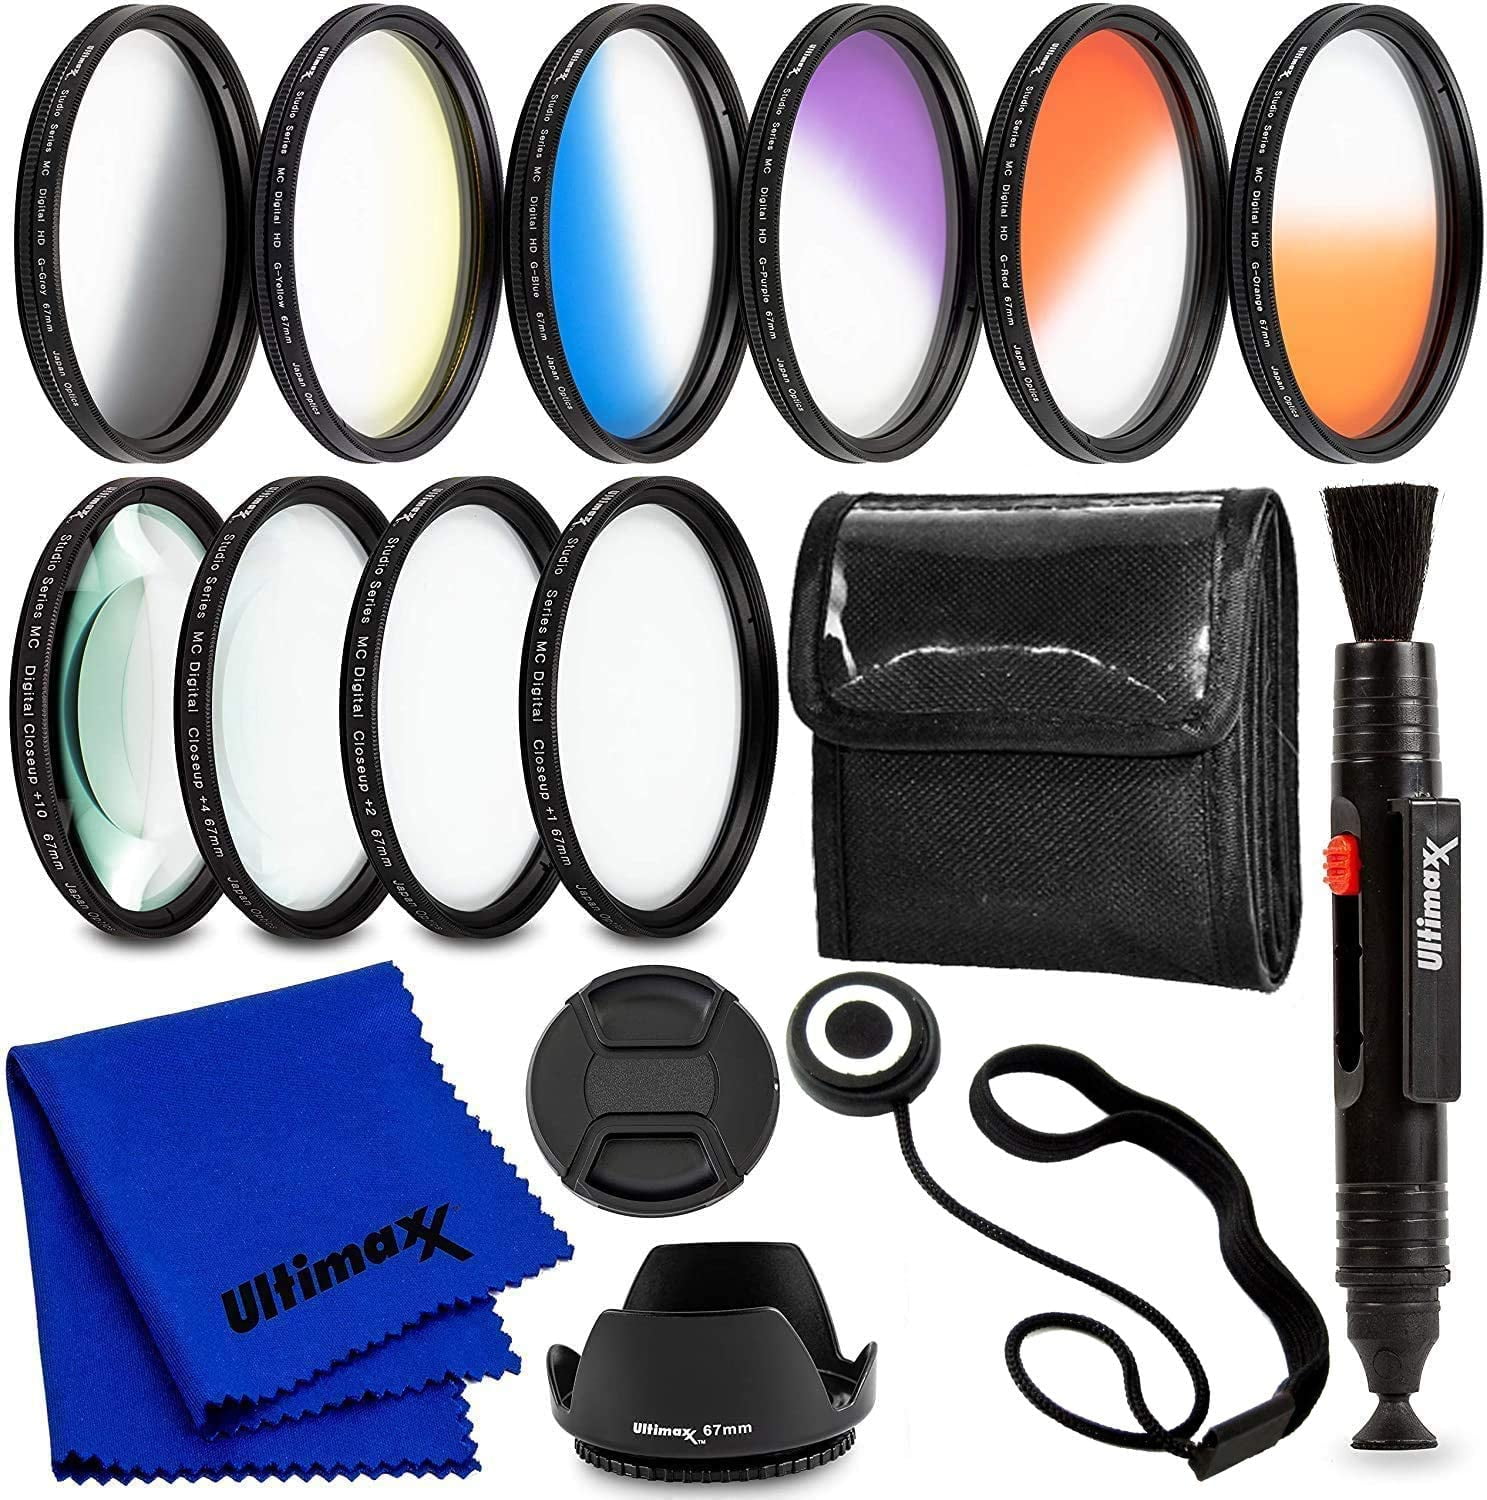 Canon EF 50mm f/1.4 USM Lens 58mm Accessory Kit for Canon 750D 760D 